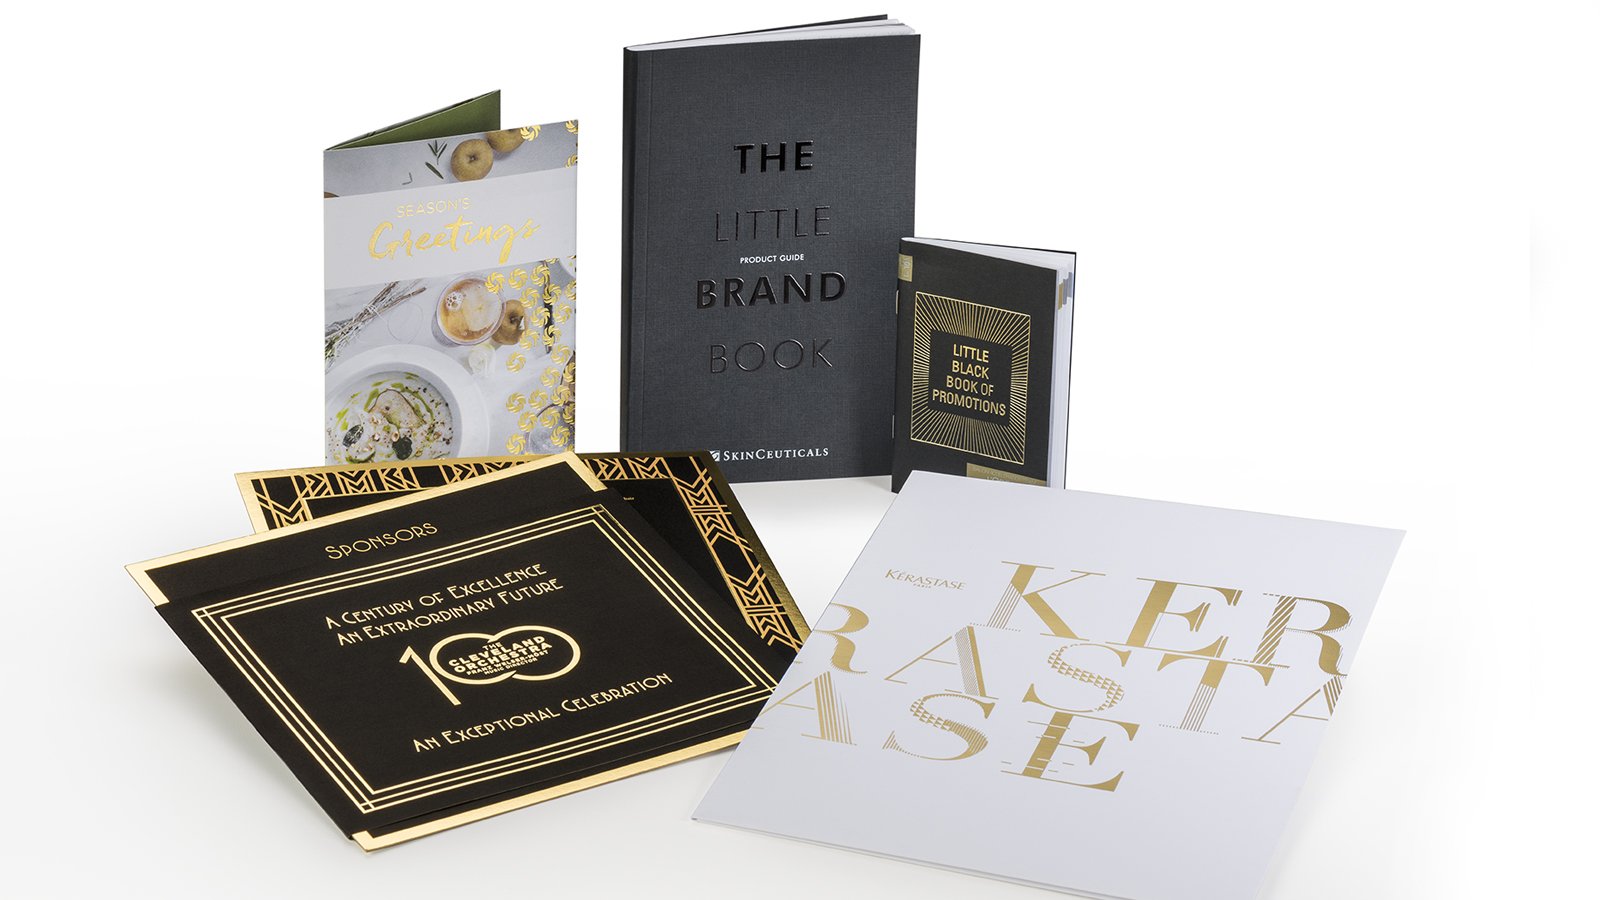 Collateral: Brand book, fliers, folders, and brochures